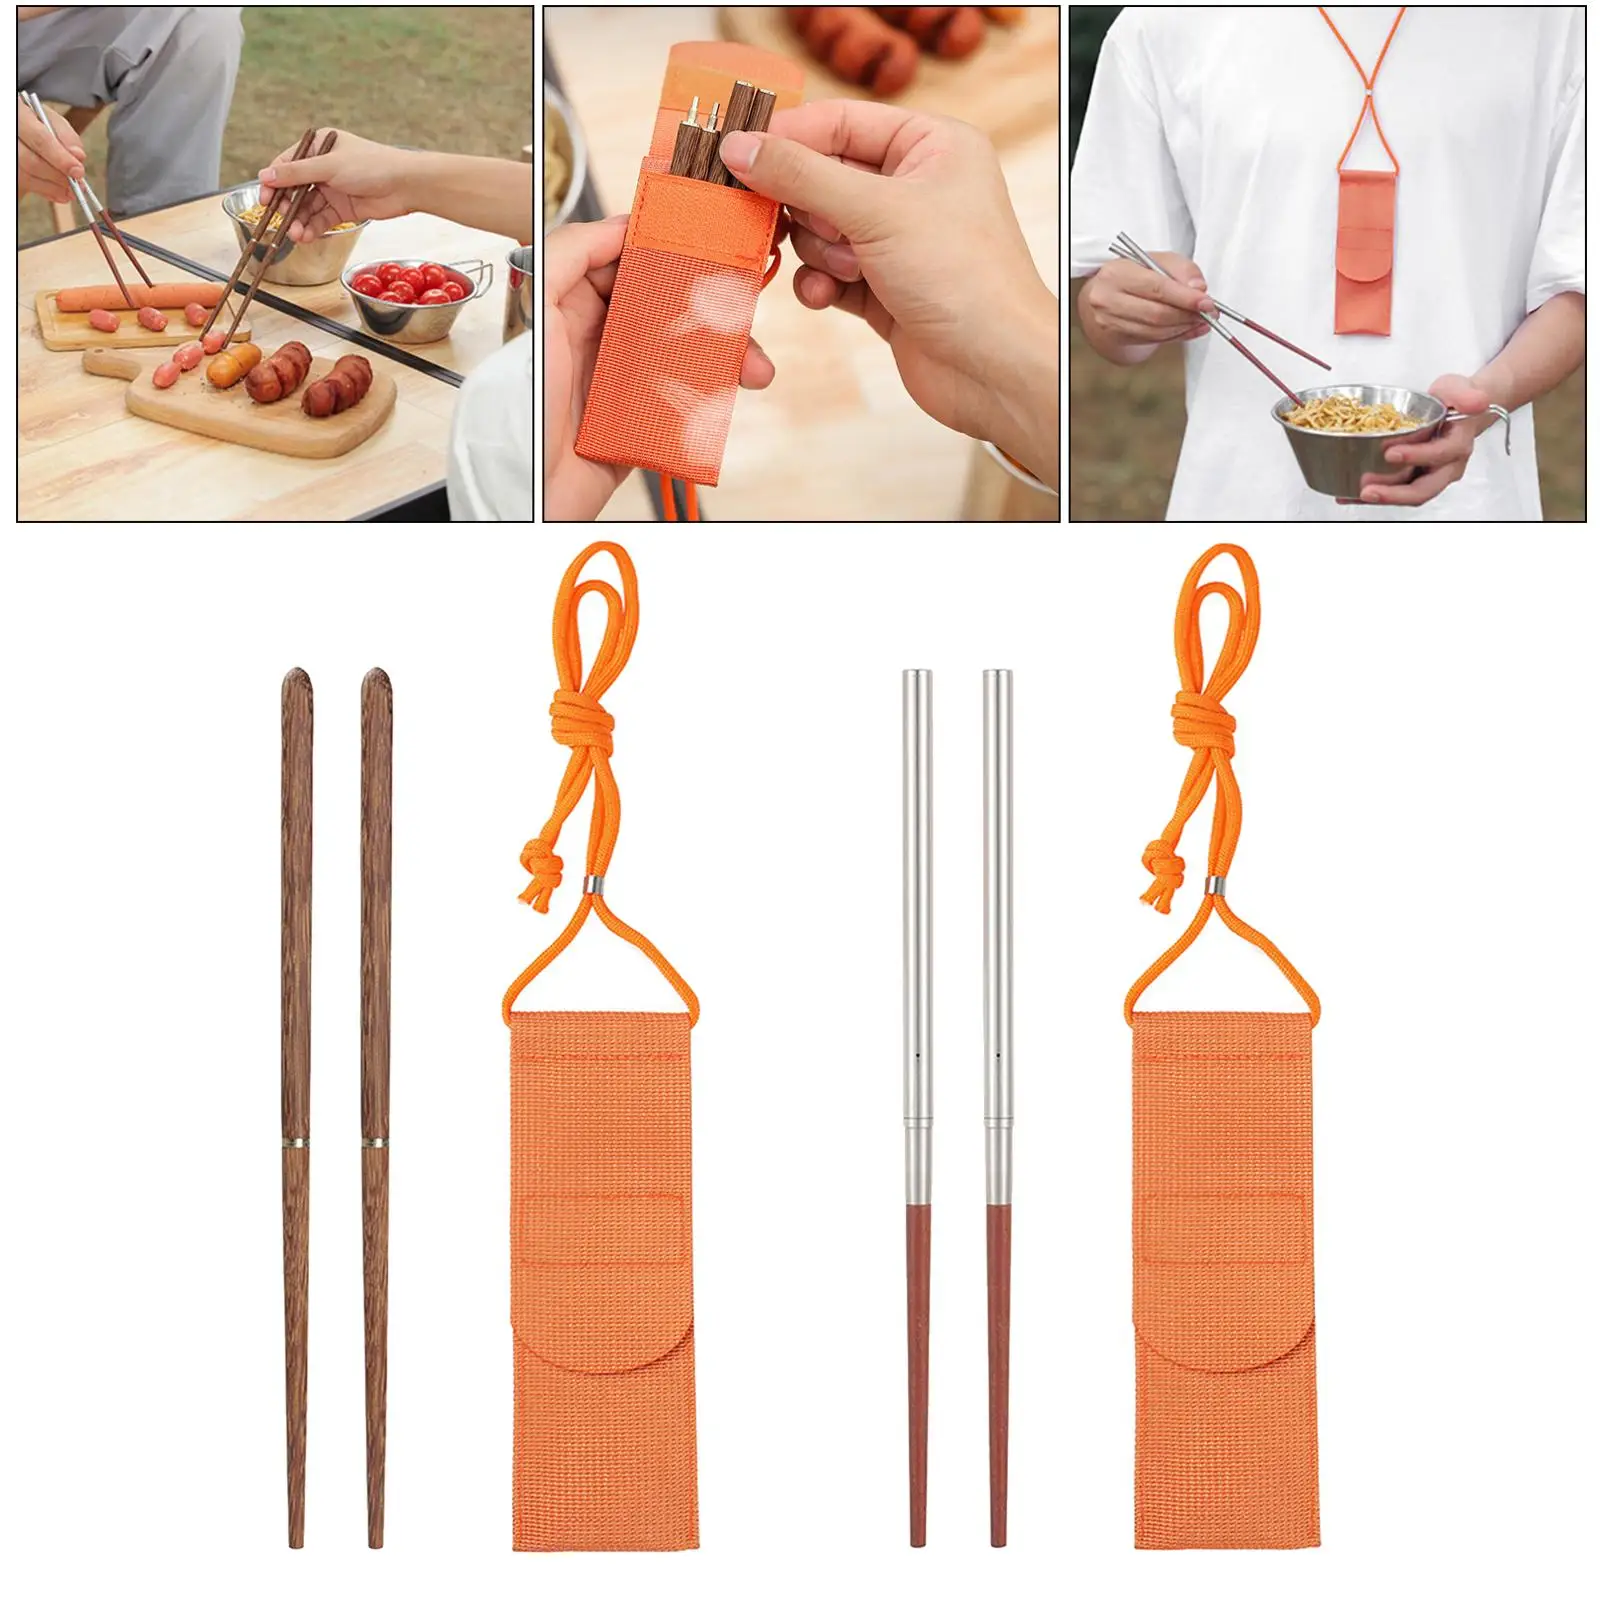 Chopsticks Reusable Wooden Stainless Steel Camping Picnic Chinese Chopstick